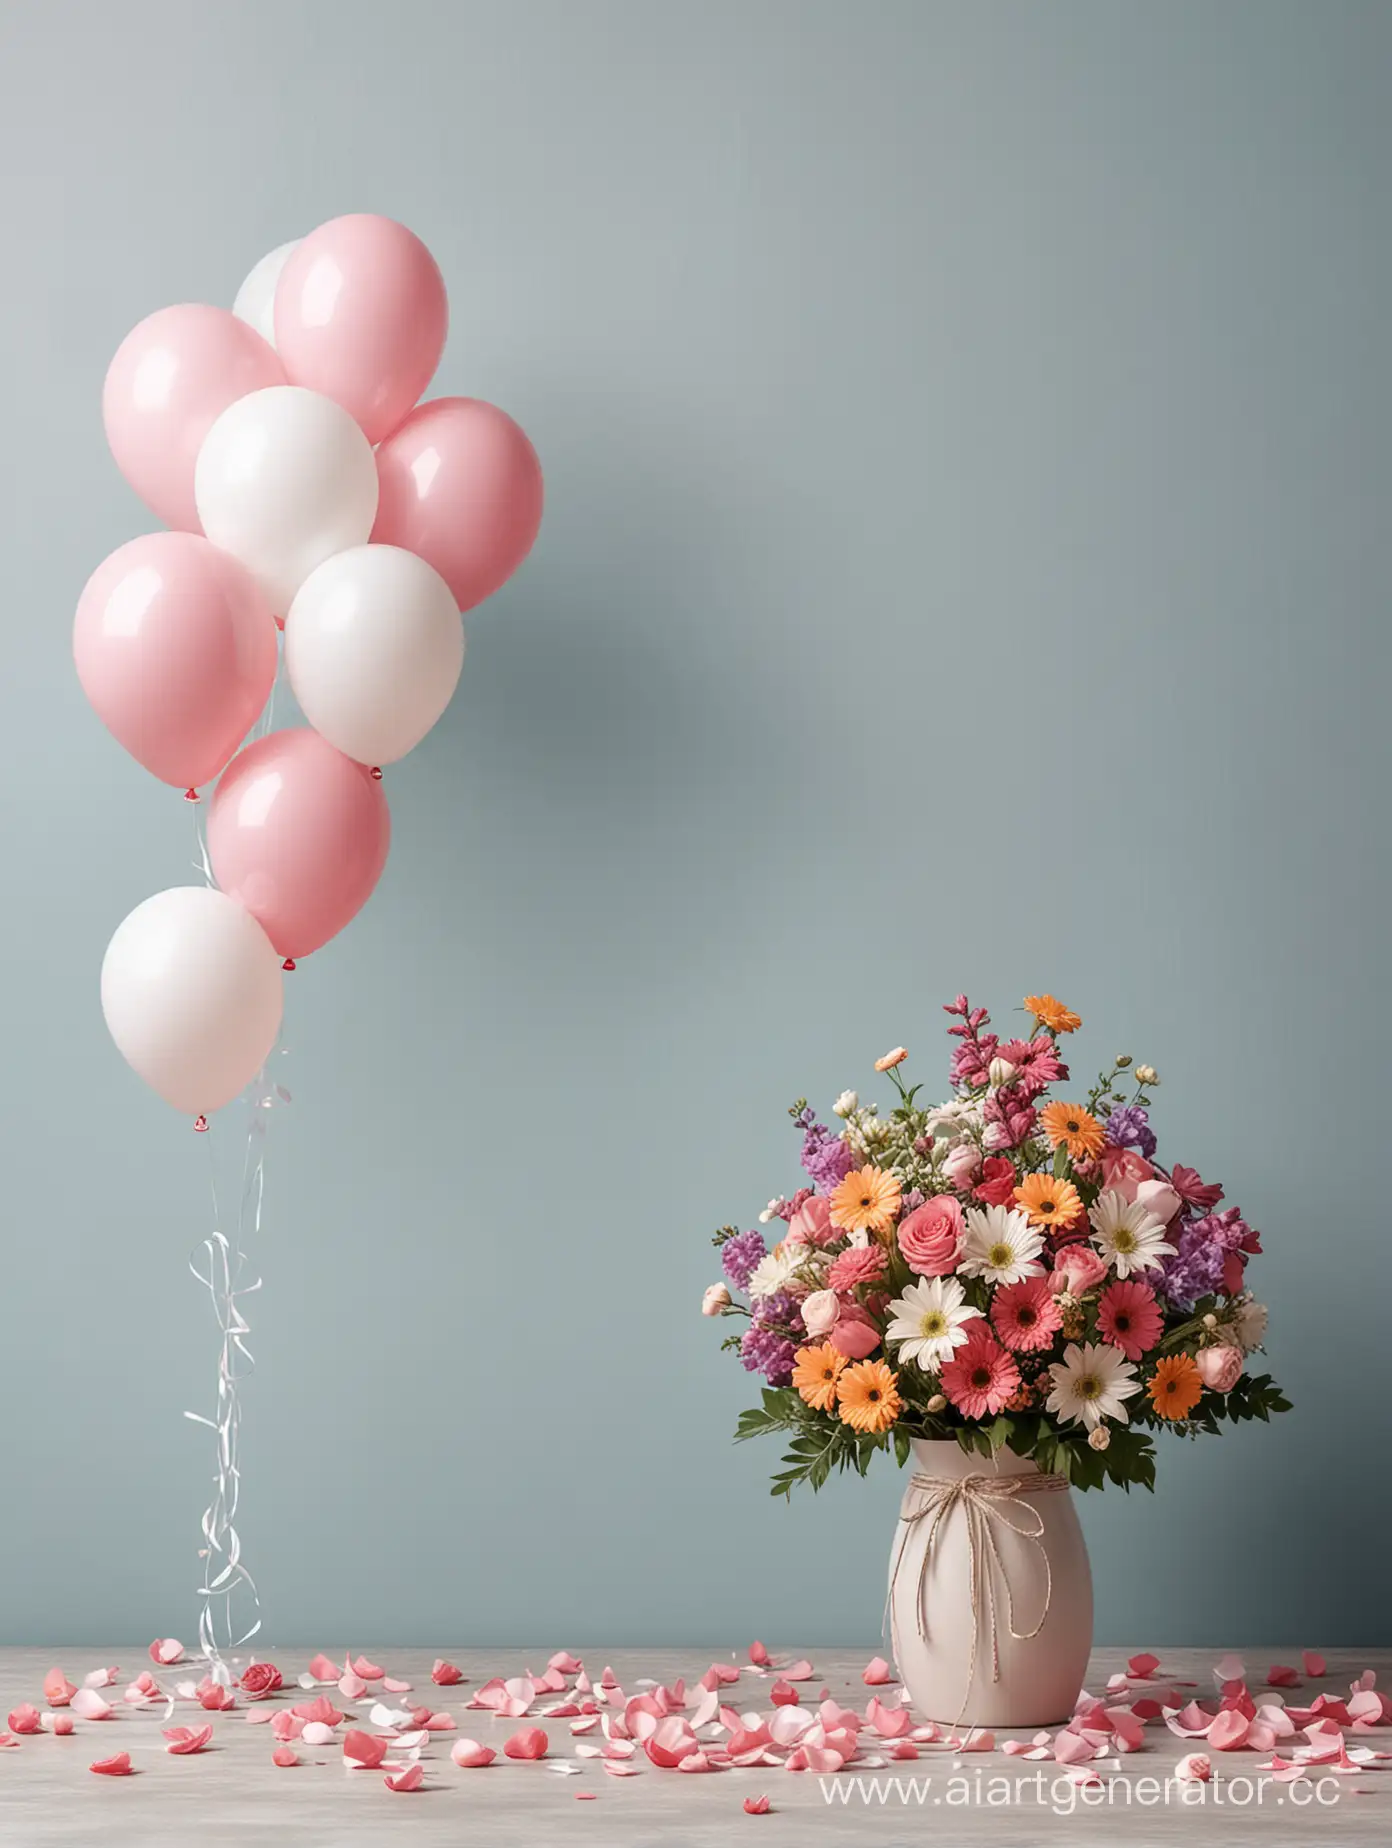 Flower-Delivery-Service-Advertisement-Background-with-Petals-and-Balloons